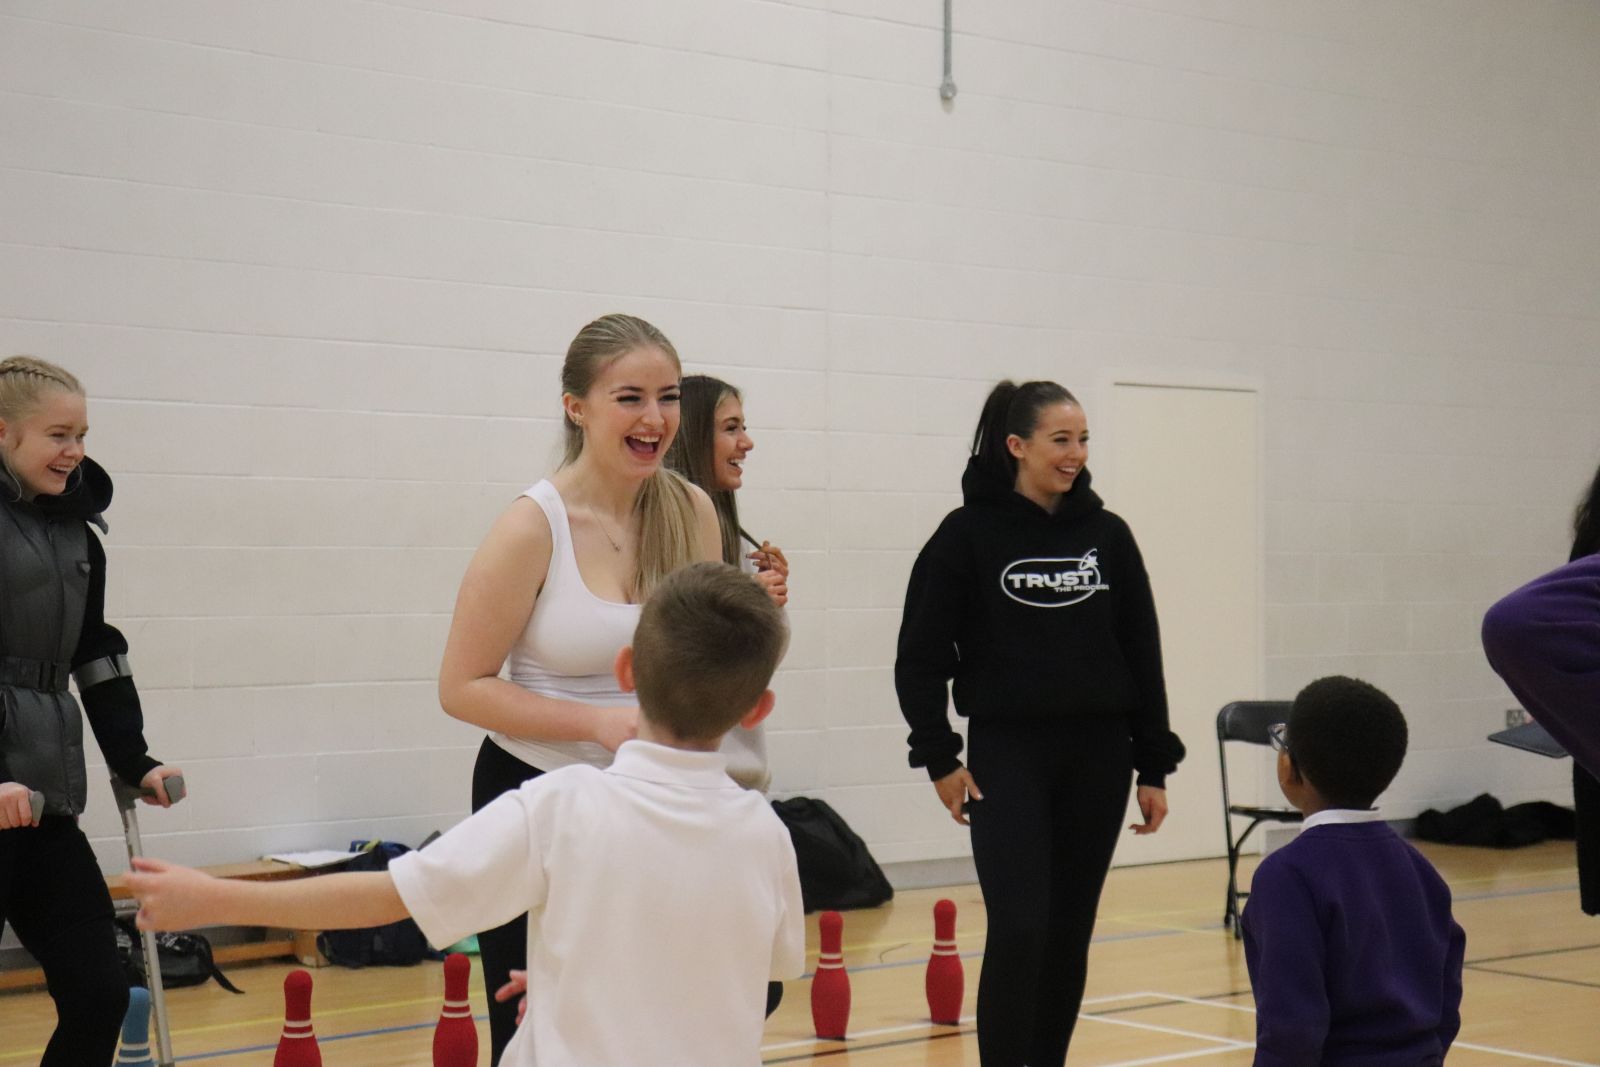 Students laughing and smiling with children whilst coaching